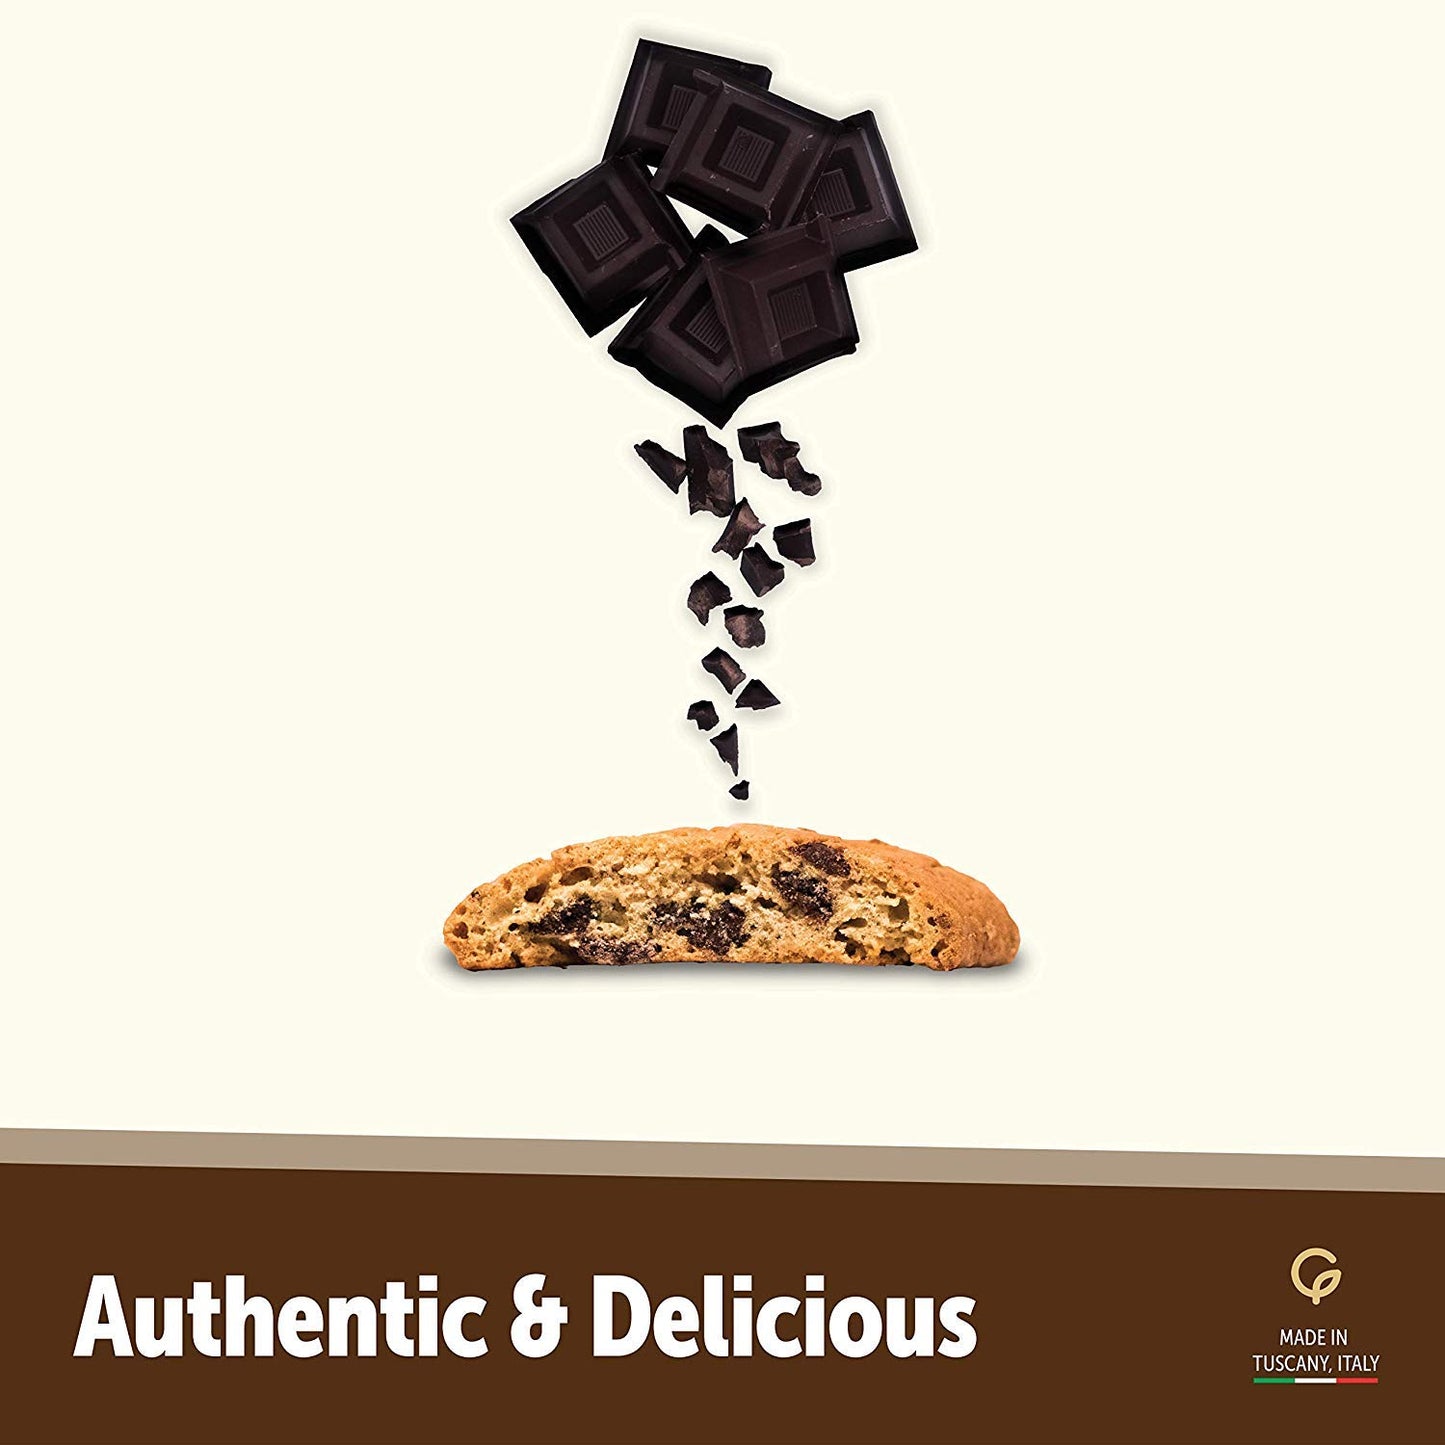 Gusta Authentic Biscotti Cookies Made in Tuscany, Italy - Chocolate